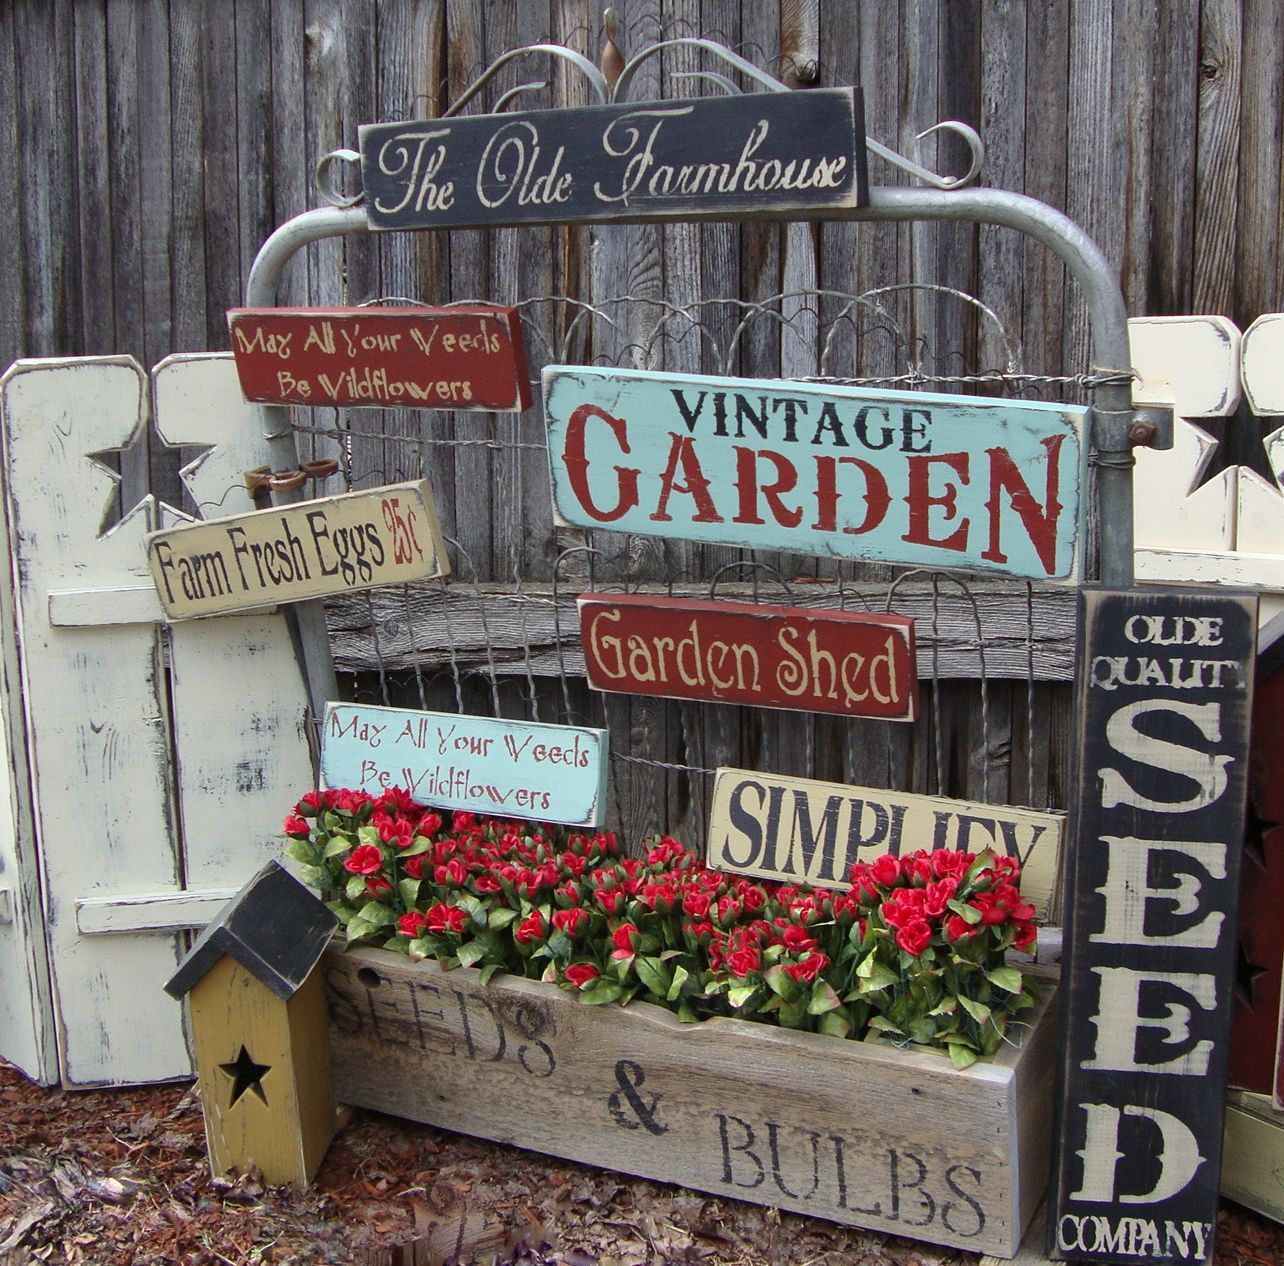 An Old Wire Gate, works well for displaying our Handmade Signs for the Garden Season.  Like us at: facebook.com/prophetbros.